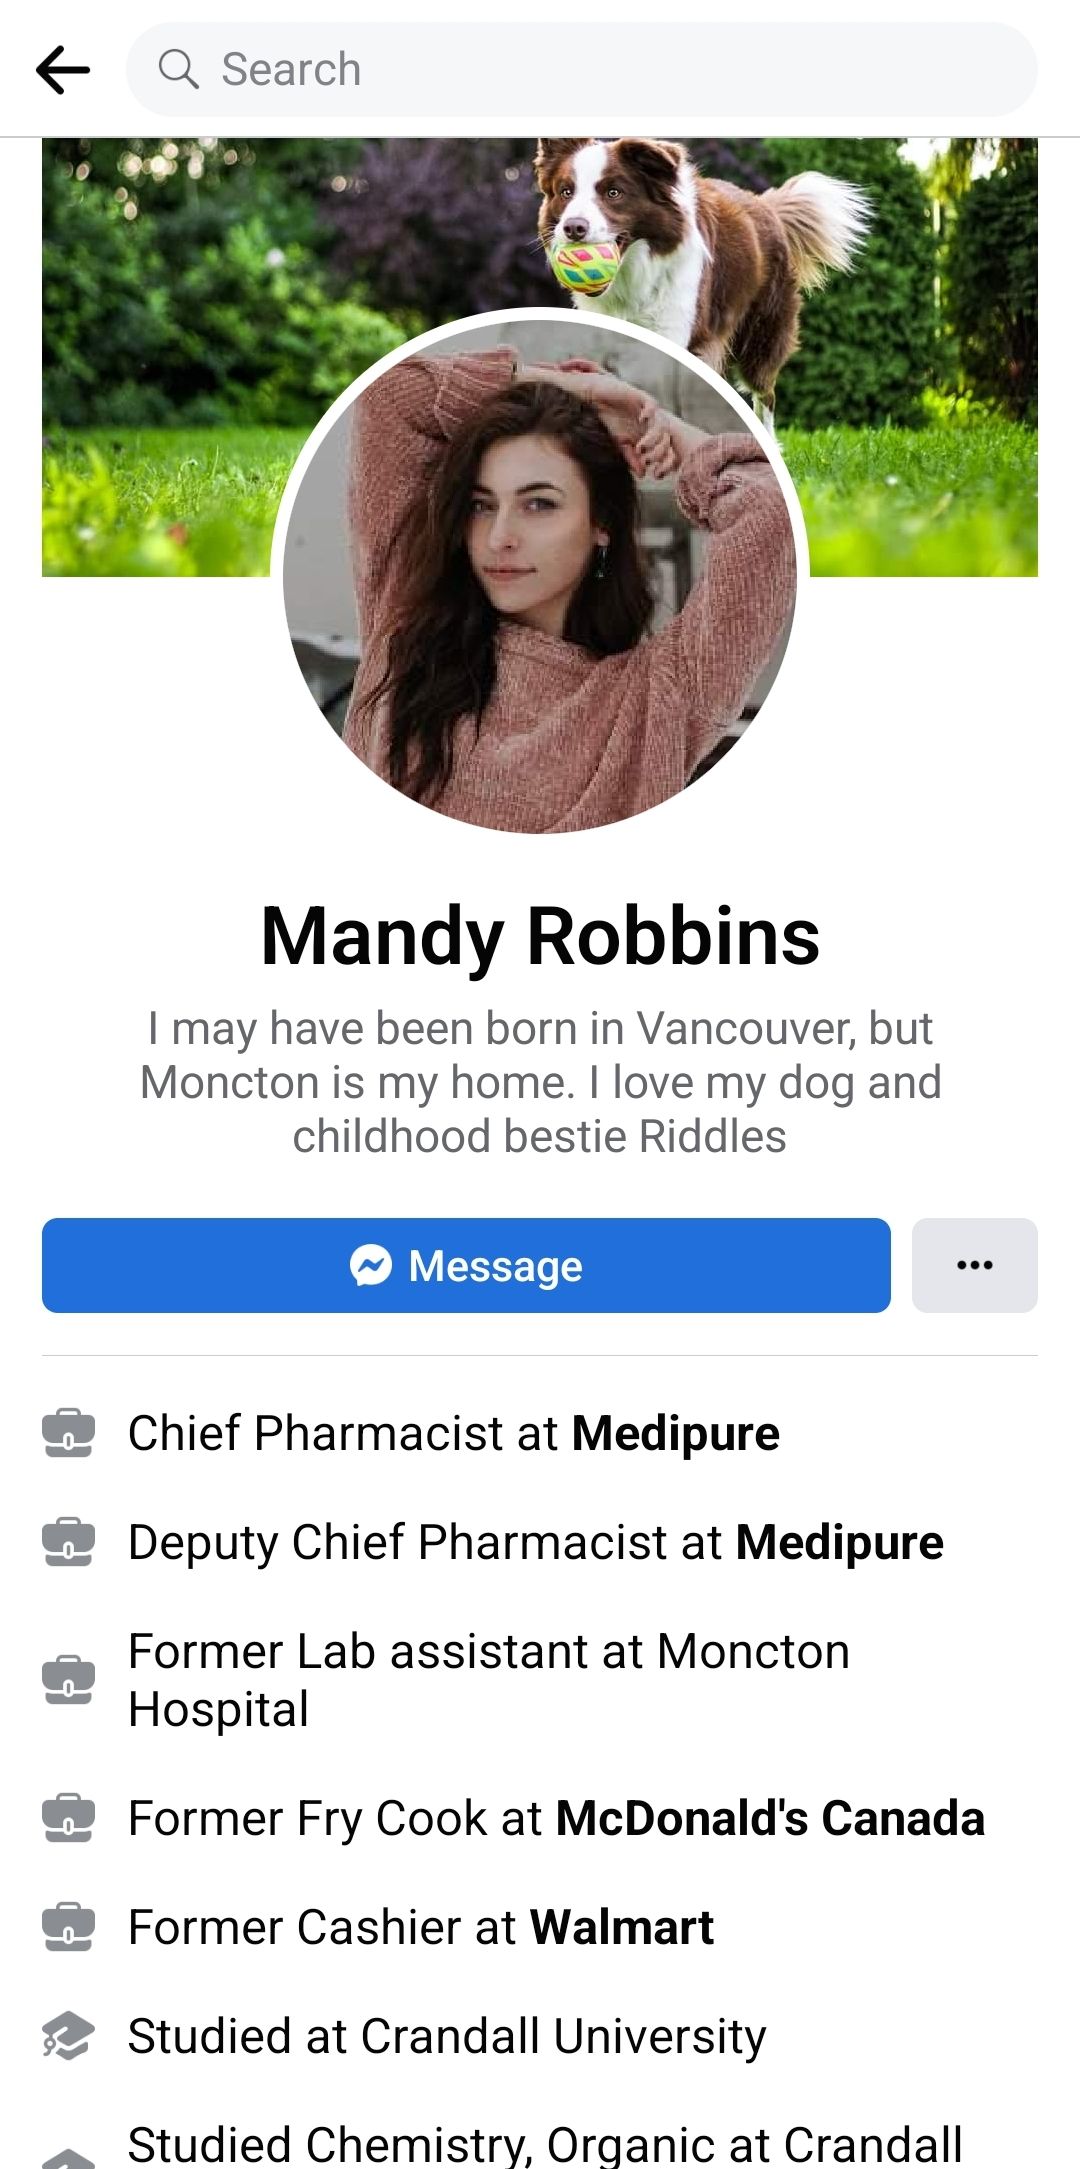 A vulnerable Facebook profile, with the user's real name, photo, and personal information.